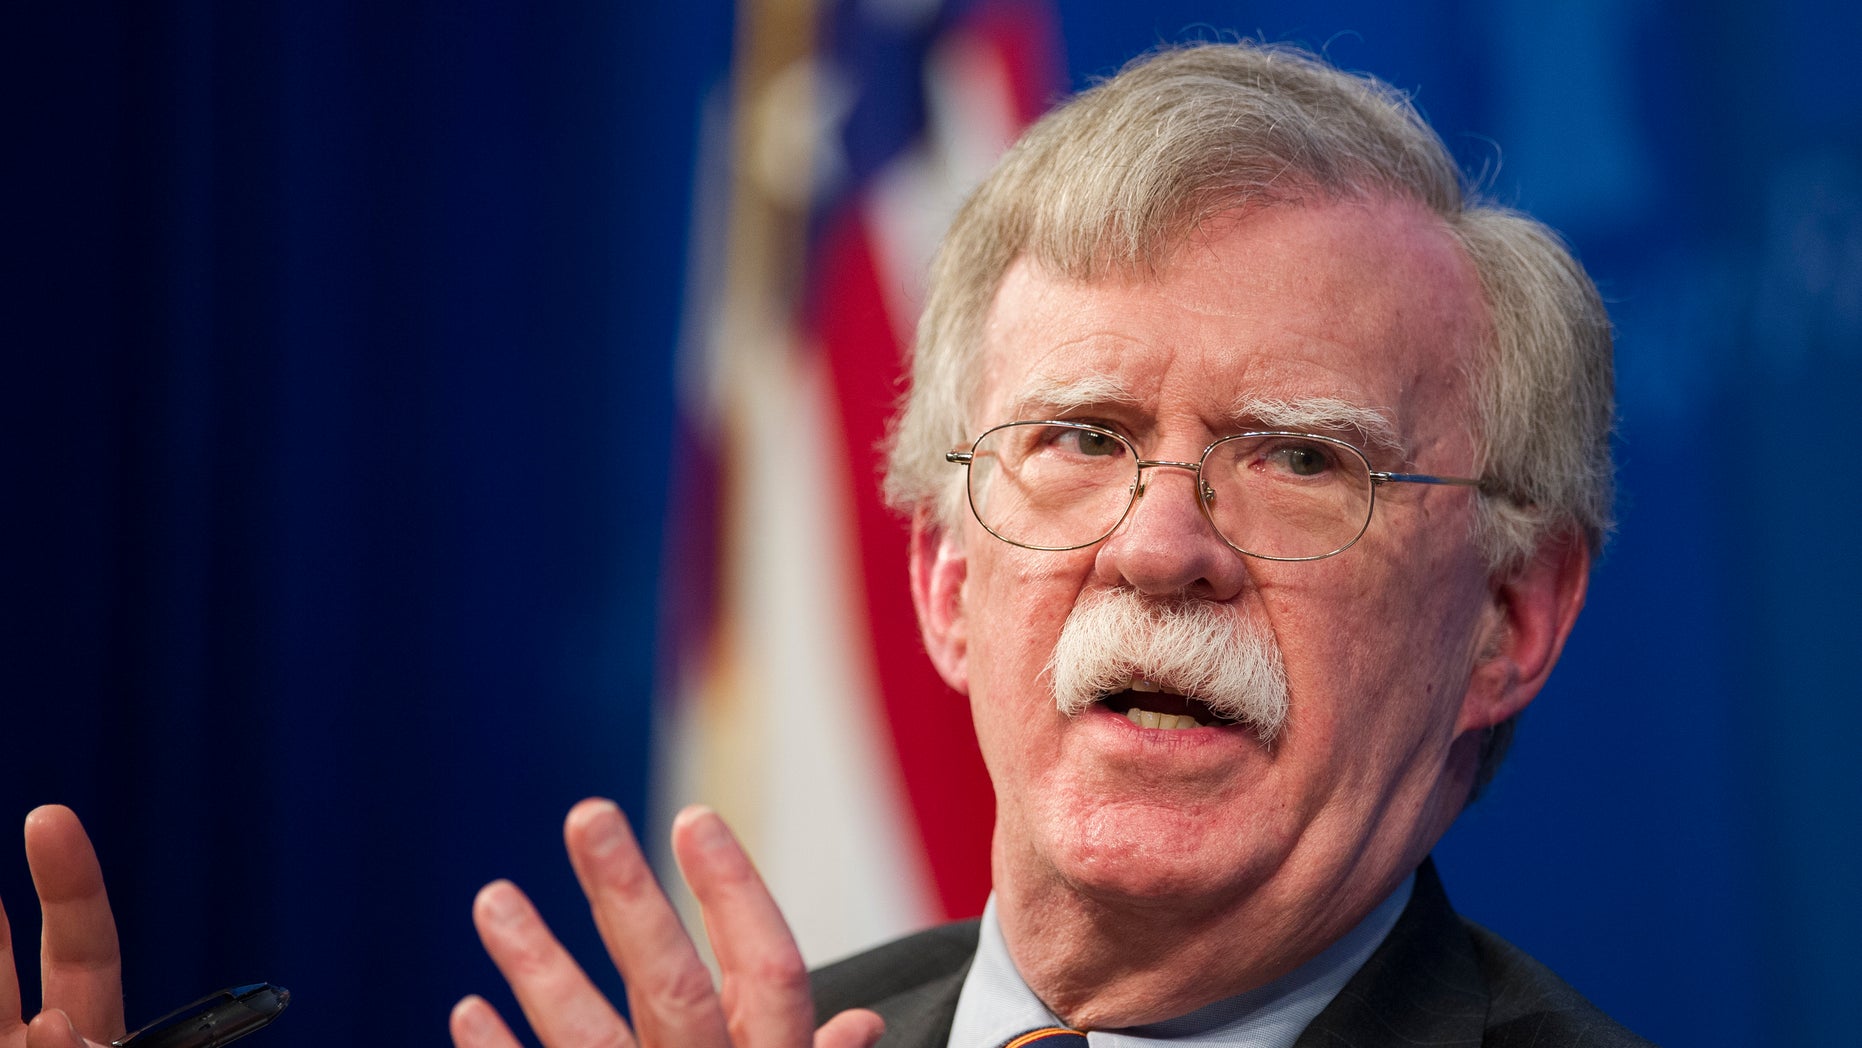 Bolton cautions Syria against using chemical weapons amid plan to pull US troops: reports